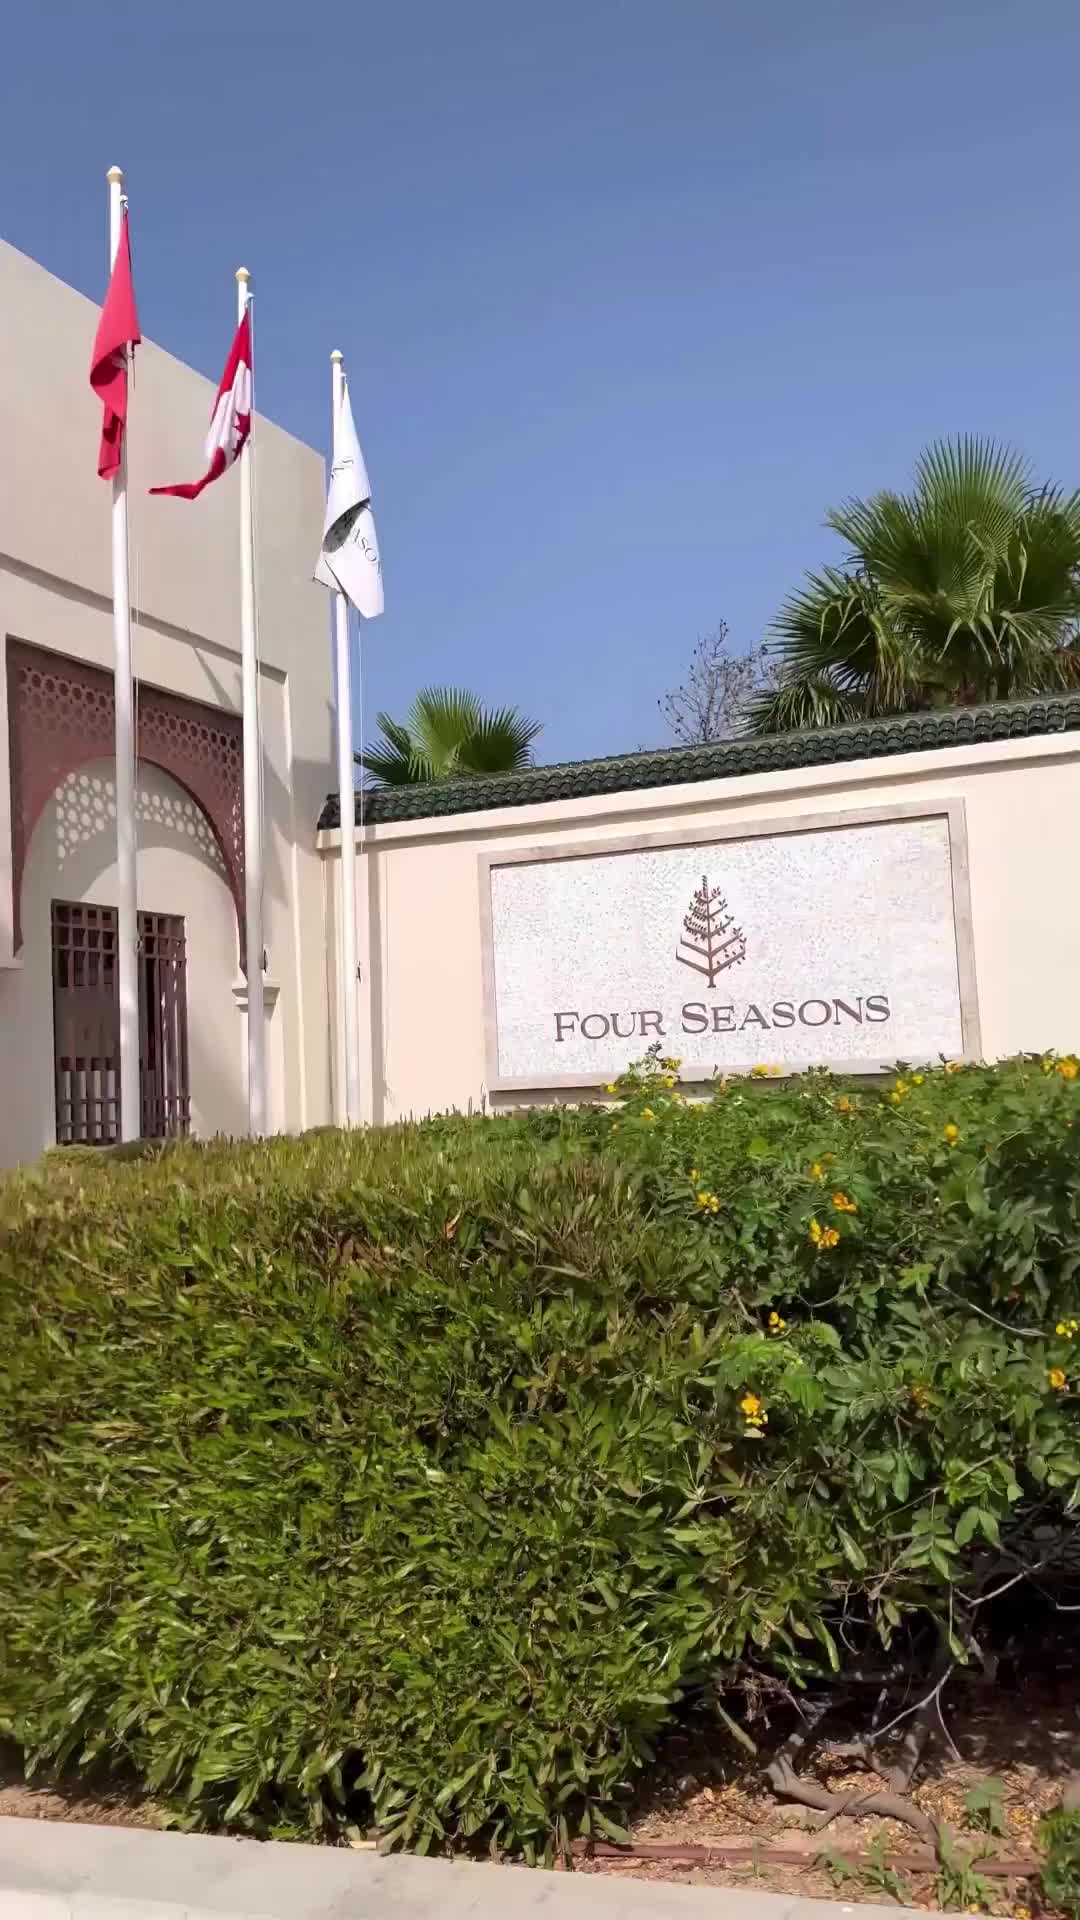 Discover Four Seasons Hotel Tunis in 30 Seconds